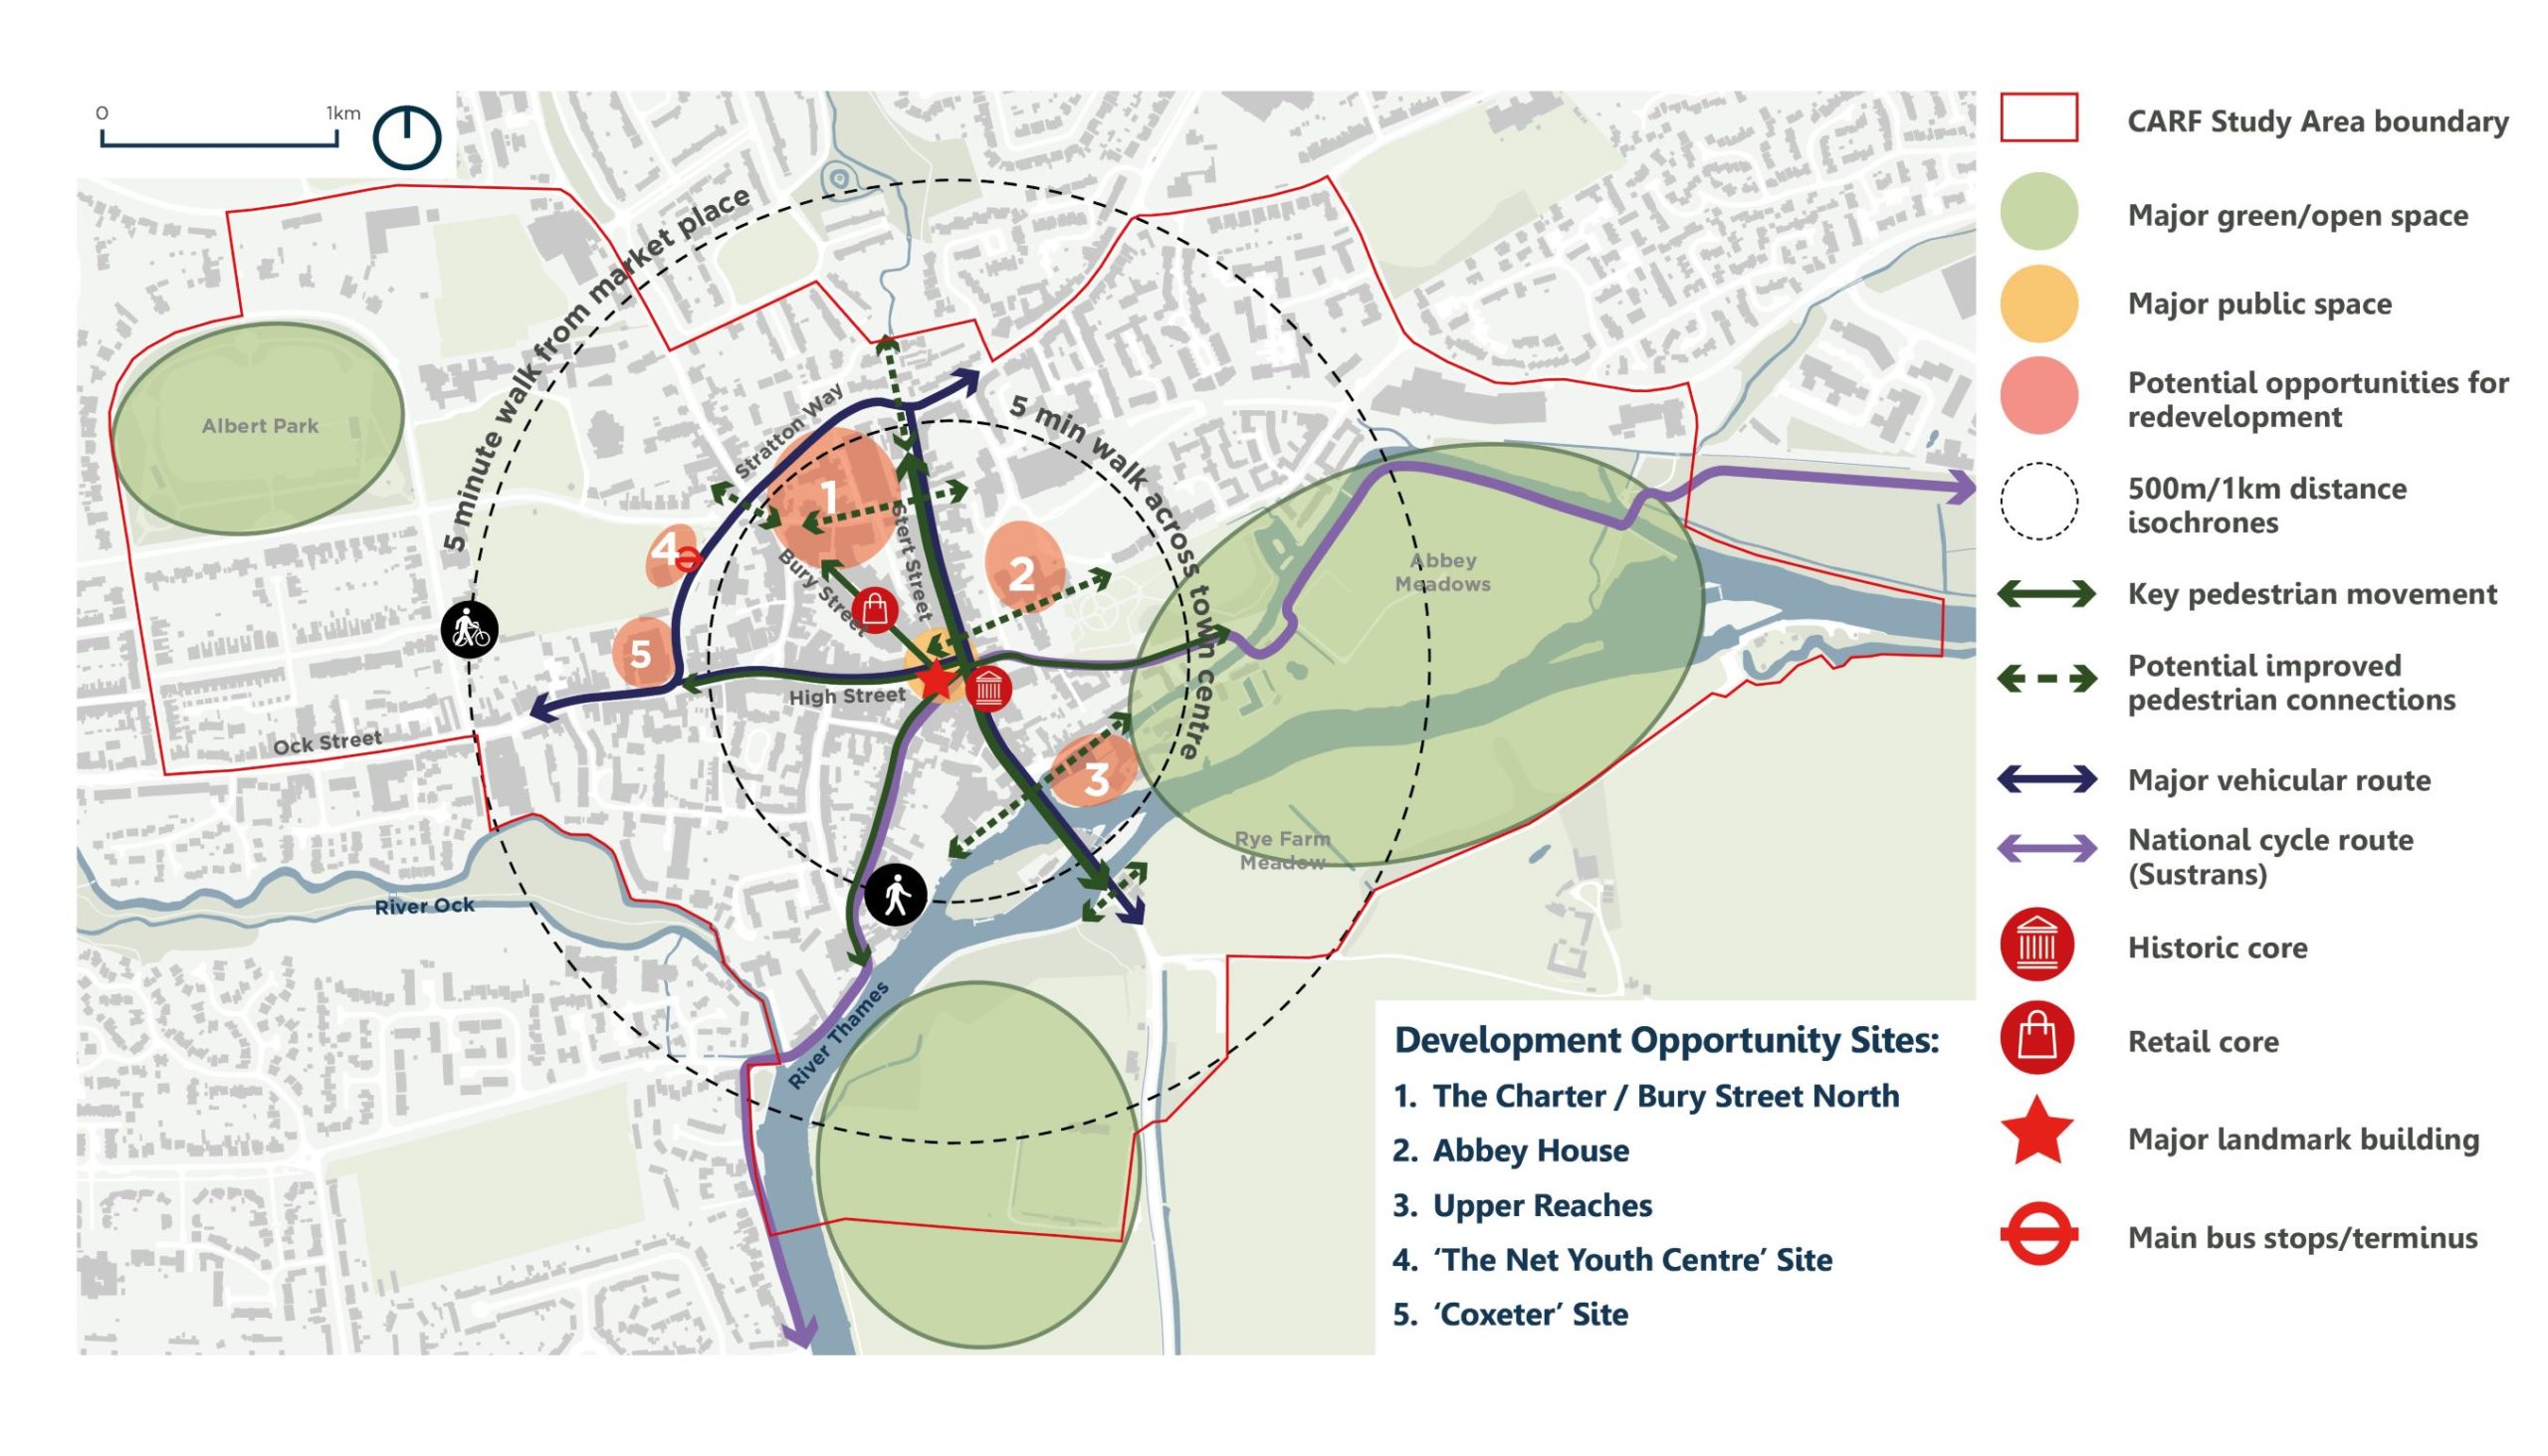 Concept Framework diagram highlighting existing major green spaces including Albert Park, Rye Farm Meadow and Abbey Meadows. Isochrones show these recreational spaces are accessible within 5 minutes from the Market Place with most of the town centre offer within a 5 minute walk from one end to the other. The plan identifies Market Place as a major public space, with key pedestrian connections from North to South along Stert Street and Bury Street and potential to improve pedestrian connections from east to west at key locations such as Broad Street, Market Place and Thames Street. The plan identifies Stratton Way, Stert Street and Bridge Street as major vehicular routes and shows the National cycle route that runs parallel to the River Thames. Development opportunity sites identified on the plan are: 1. The Charter / Bury Street North, 2. Abbey House, 3. Upper Reaches, 4. The Net Youth Centre, 5. Coxeter House